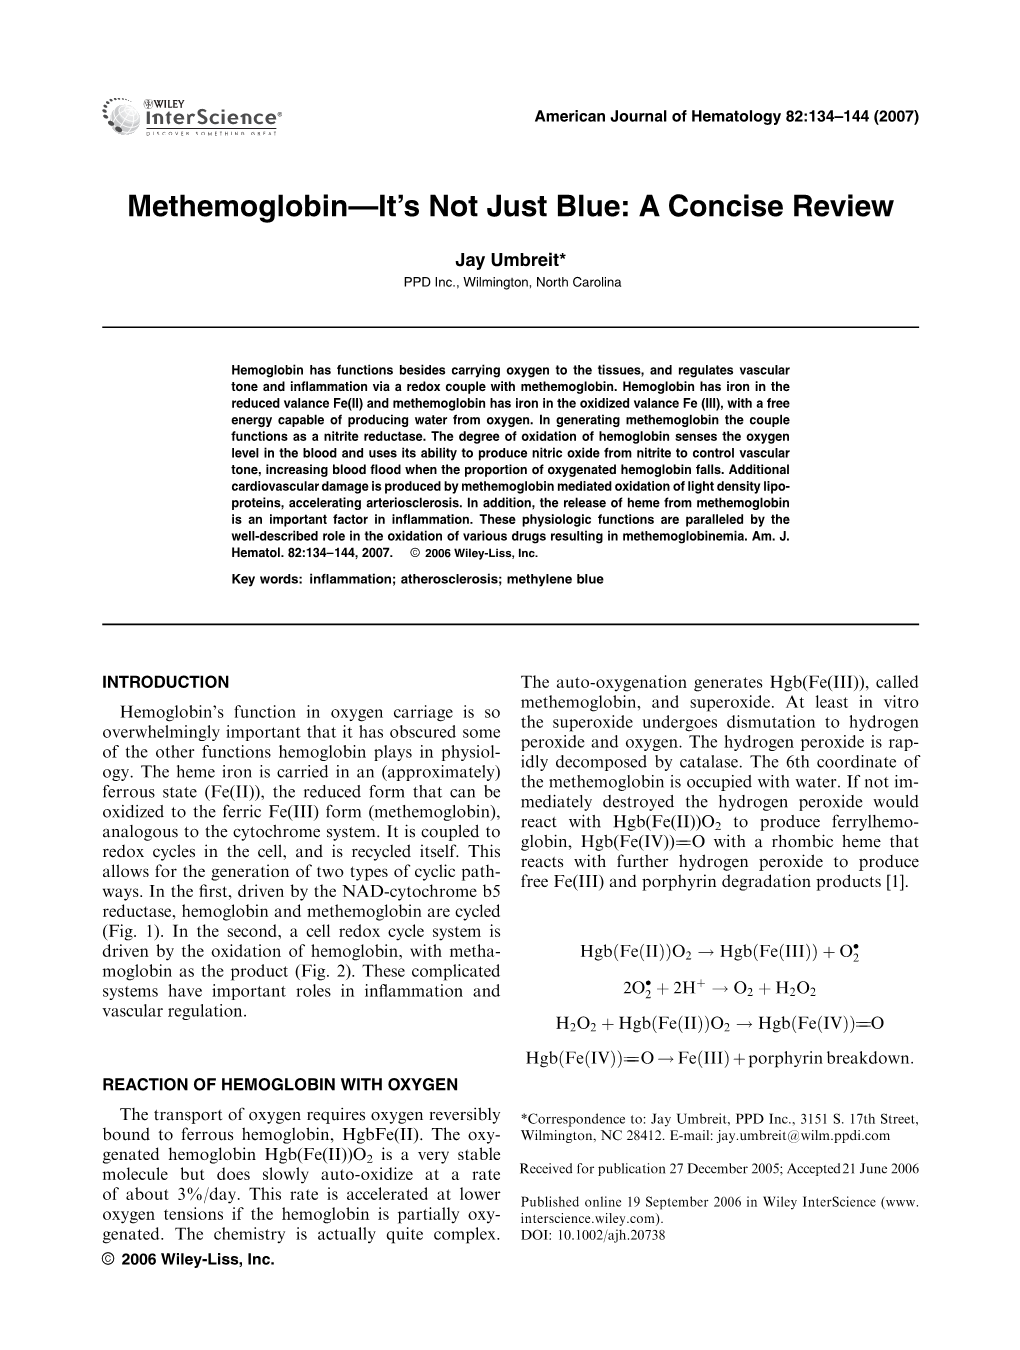 Methemoglobin-It's Not Just Blue: a Concise Review